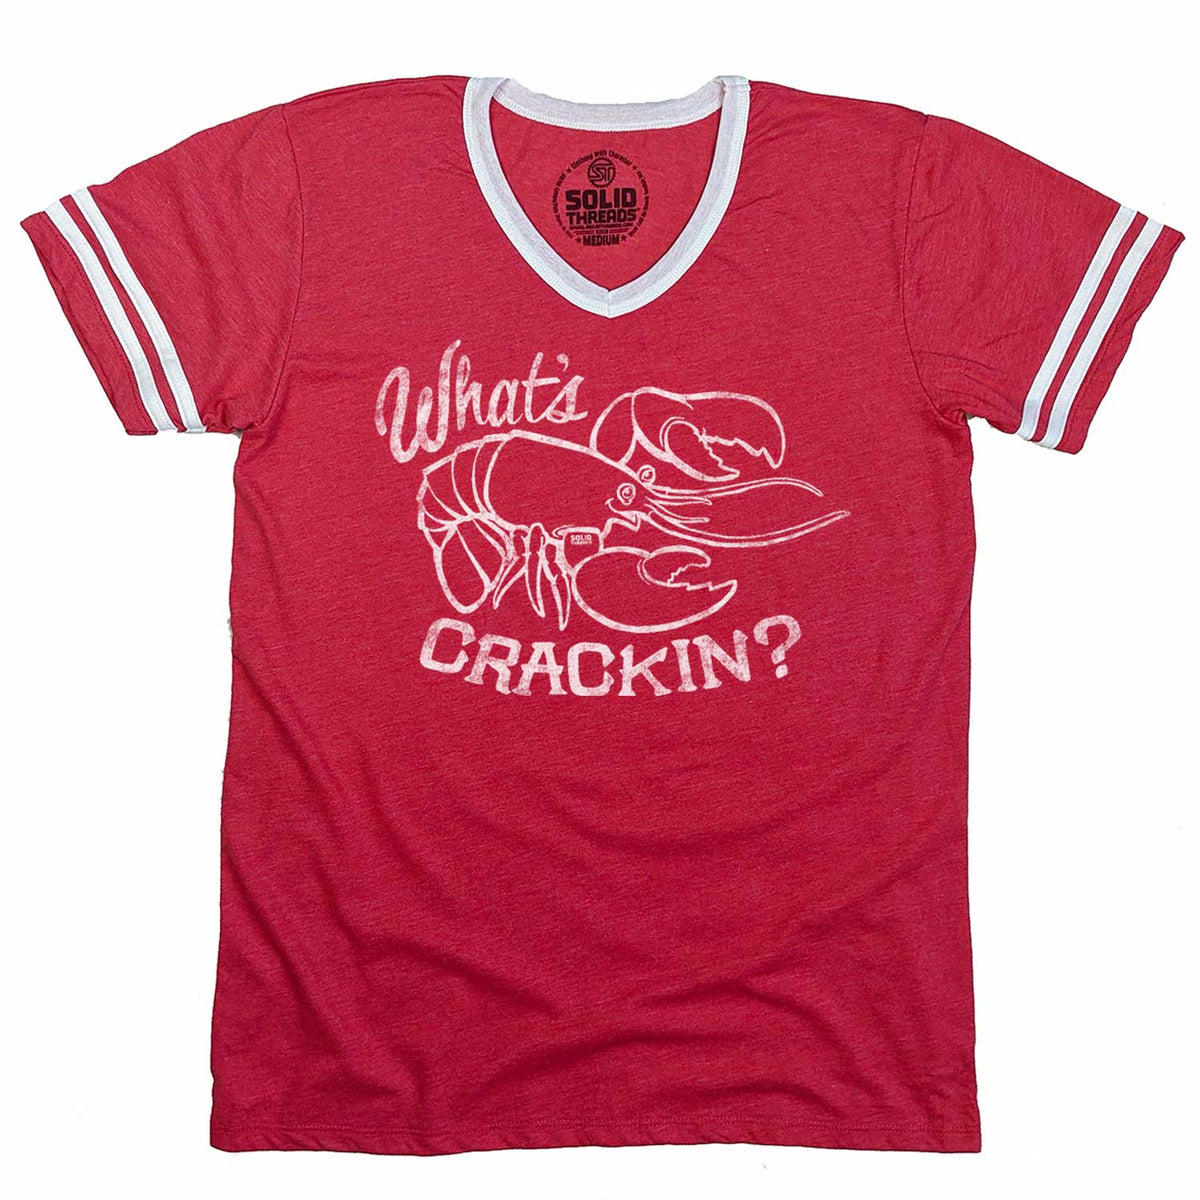 Men&#39;s What&#39;s Crackin Vintage Graphic V-Neck Tee | Funny Lobster Shirt for Foodie | Solid Threads